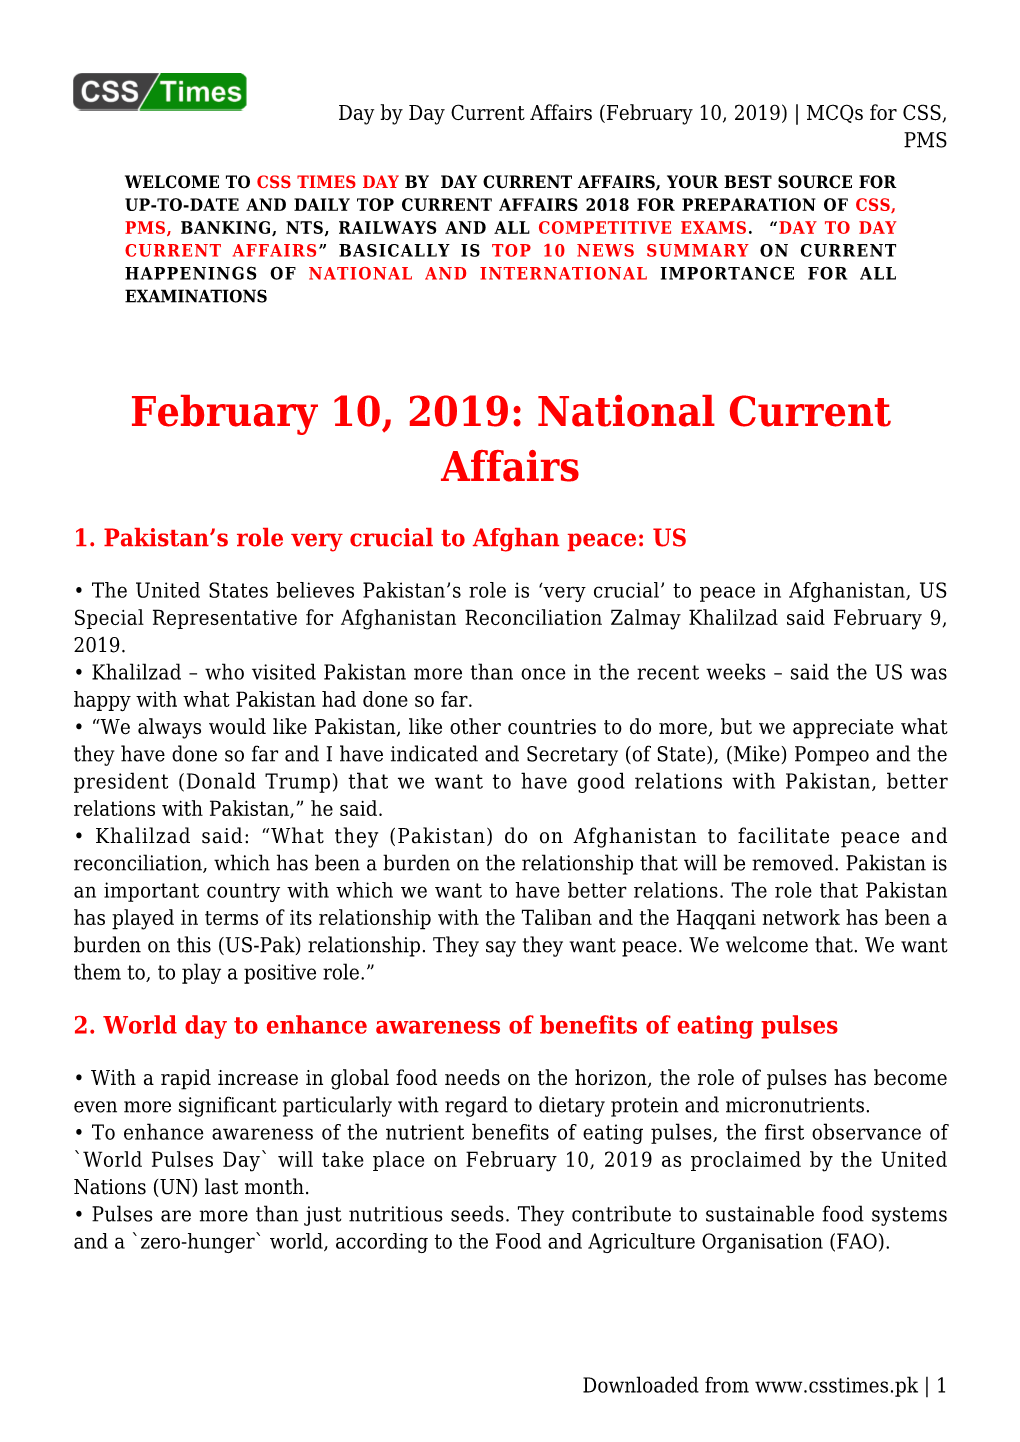 Day by Day Current Affairs (February 10, 2019) | Mcqs for CSS, PMS